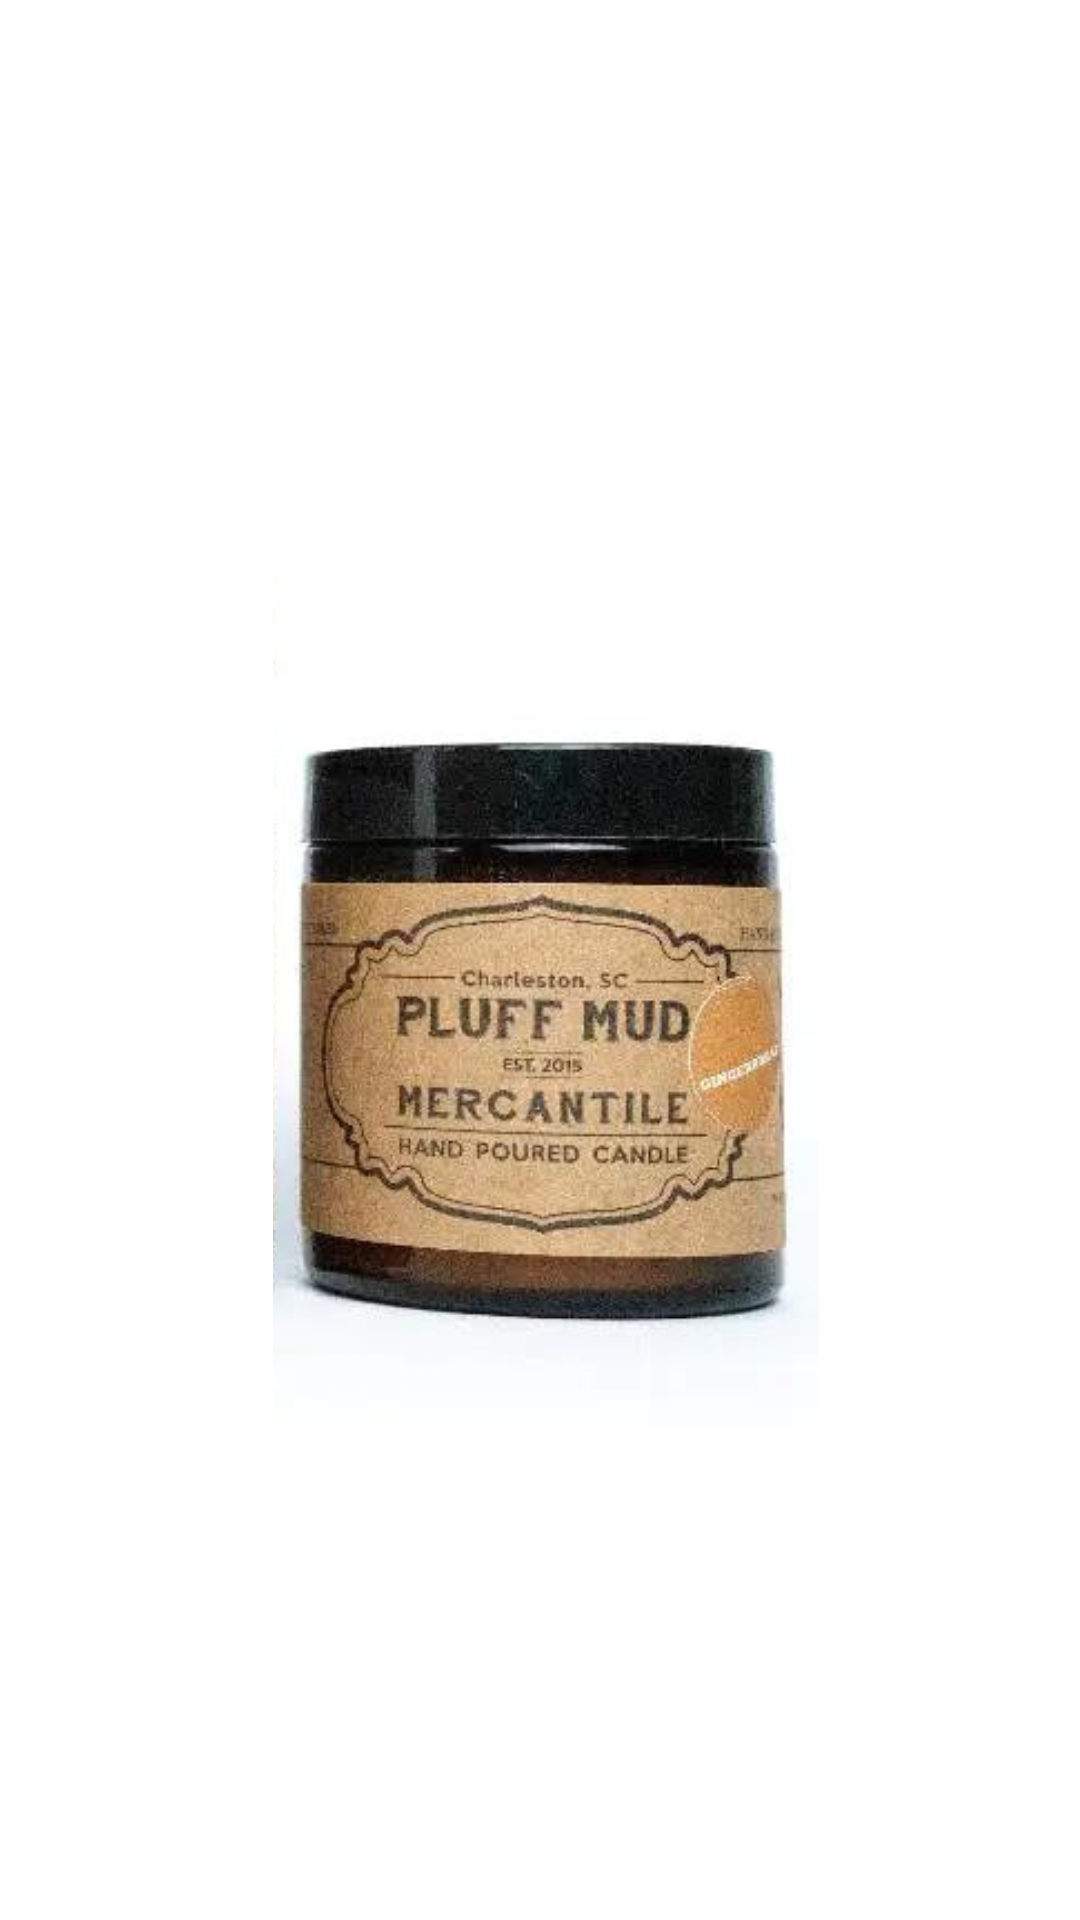 Charleston Tea Olive Hand Poured Soy Candle - Pluff Mud Mercantile